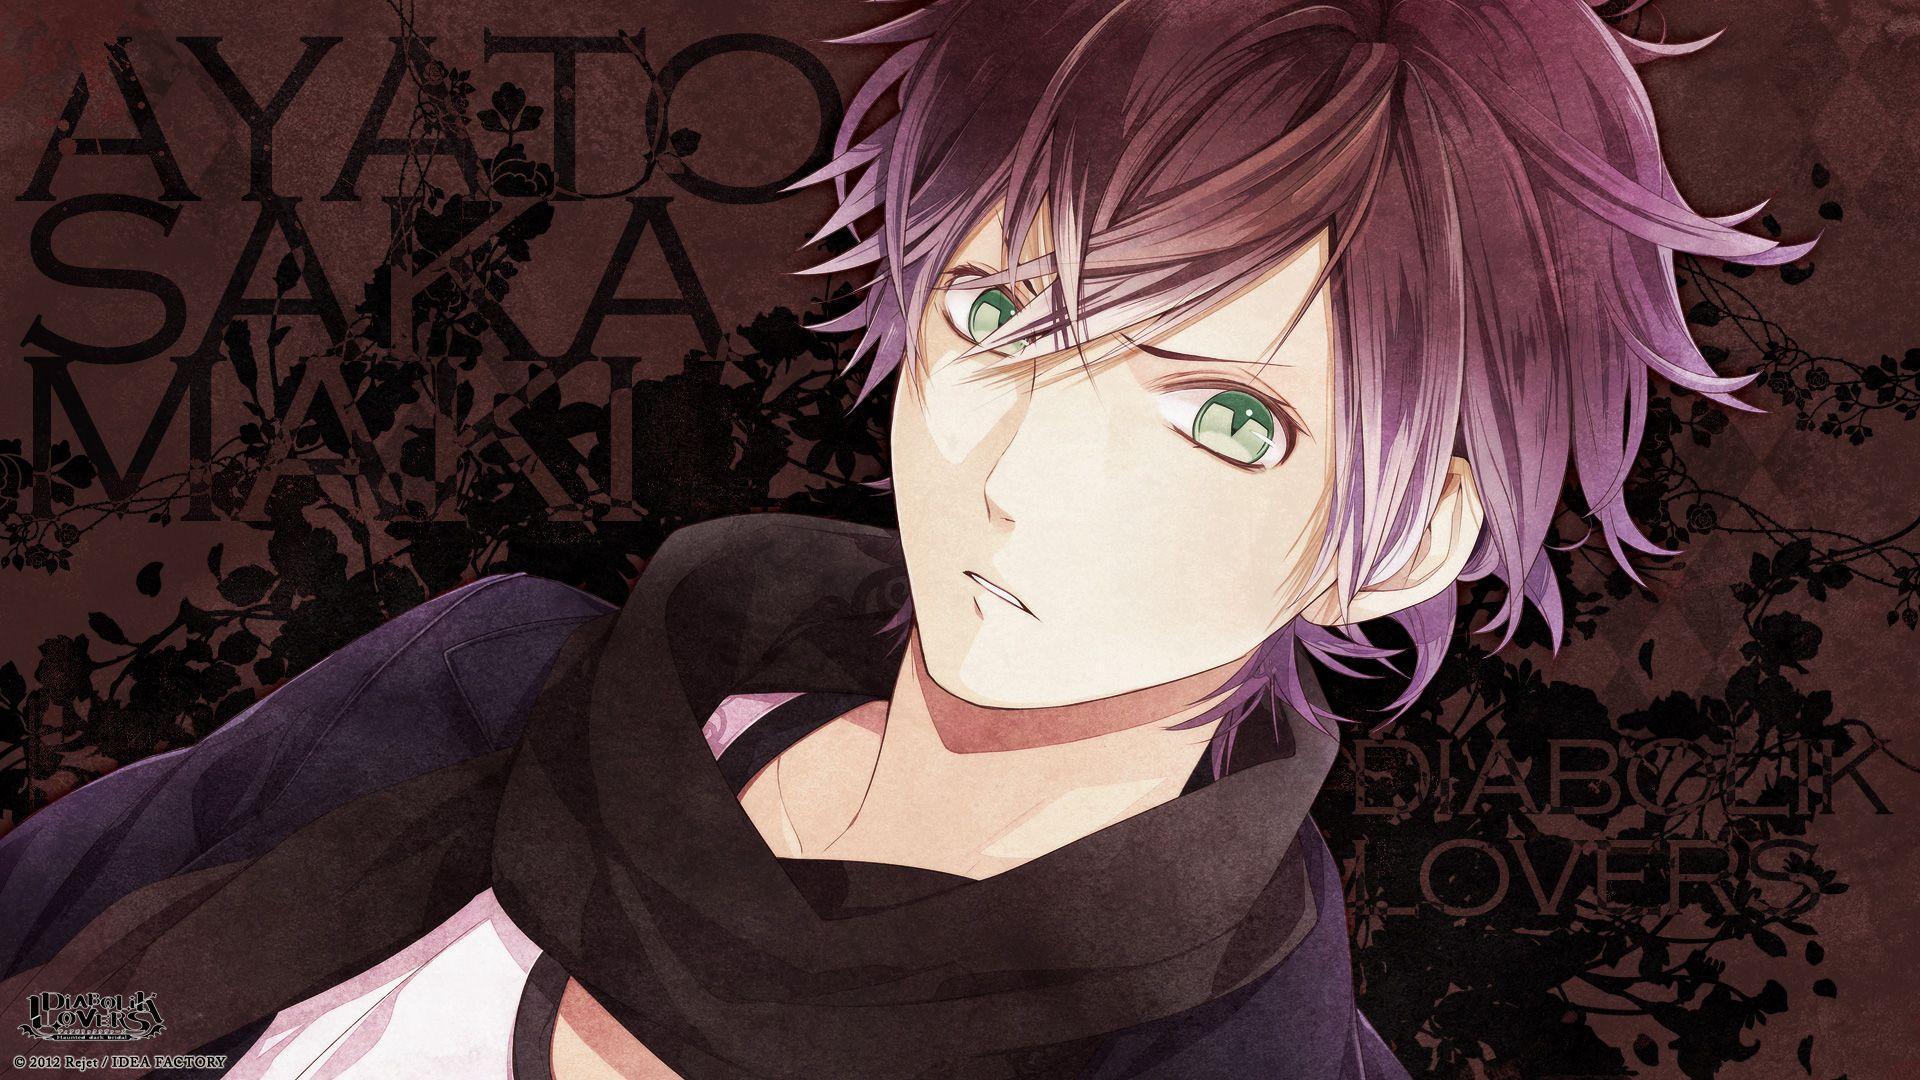 1000+ image about Diabolik lovers